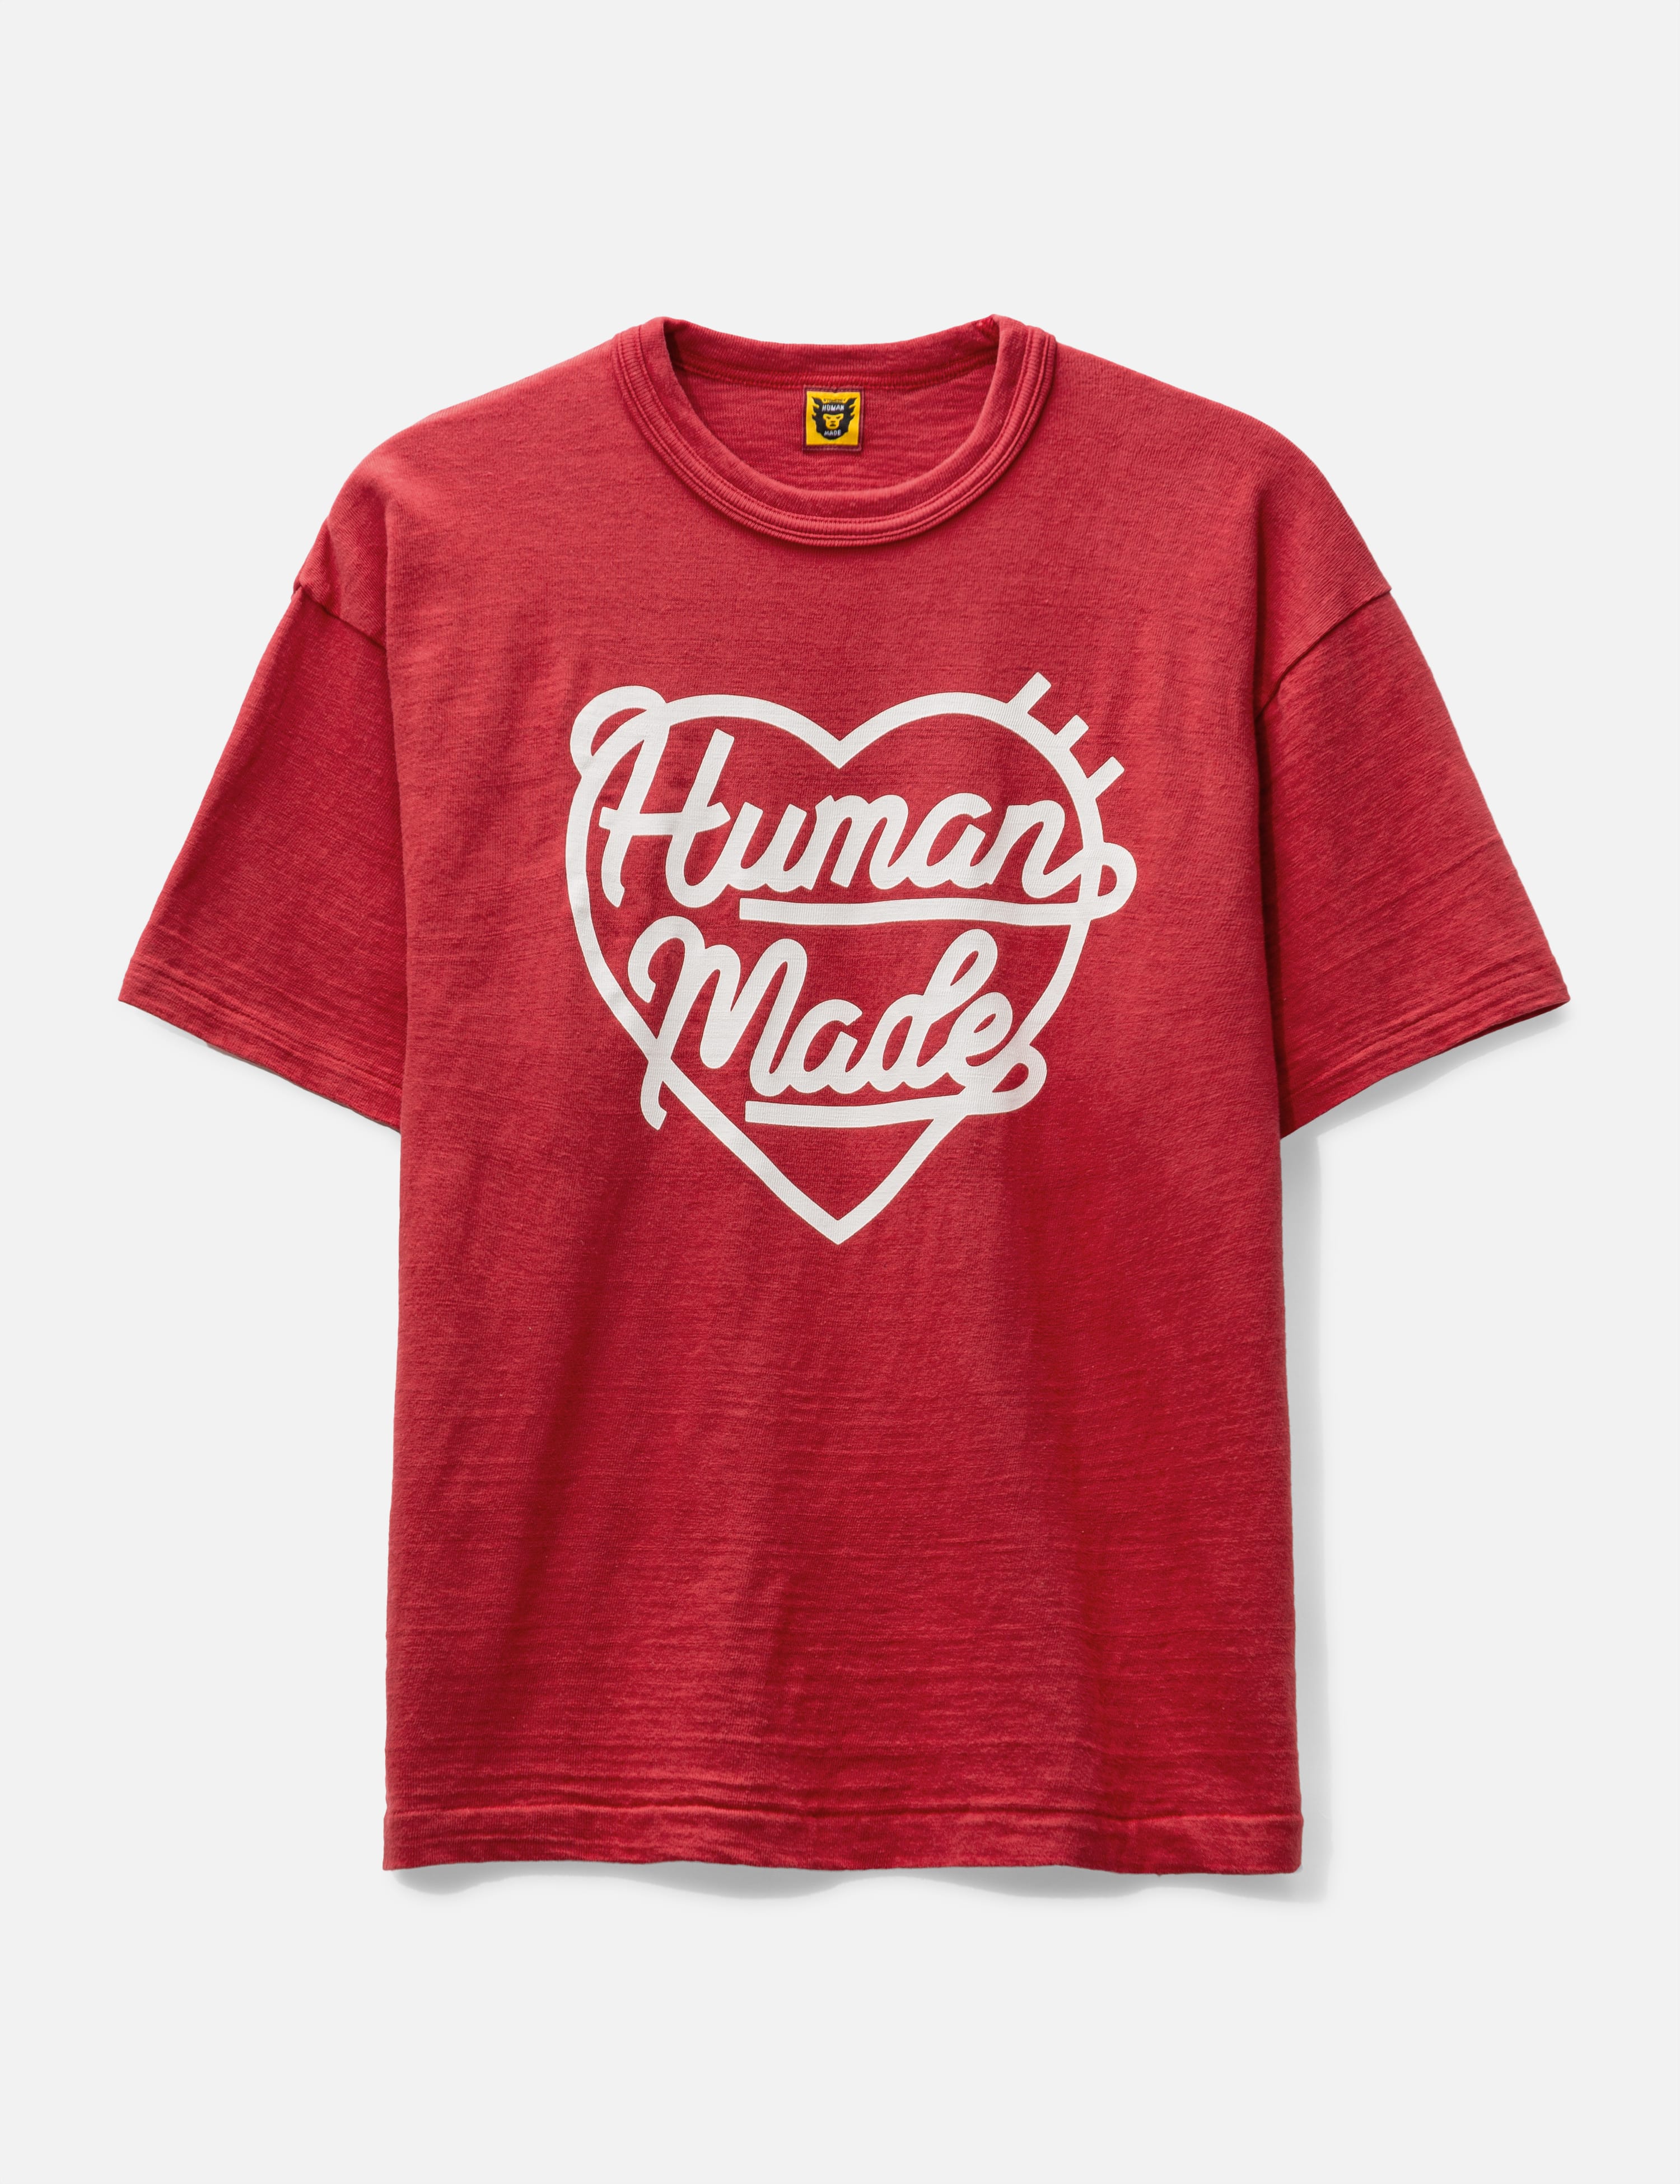 Human Made - Color T-shirt #2 | HBX - Globally Curated Fashion and 